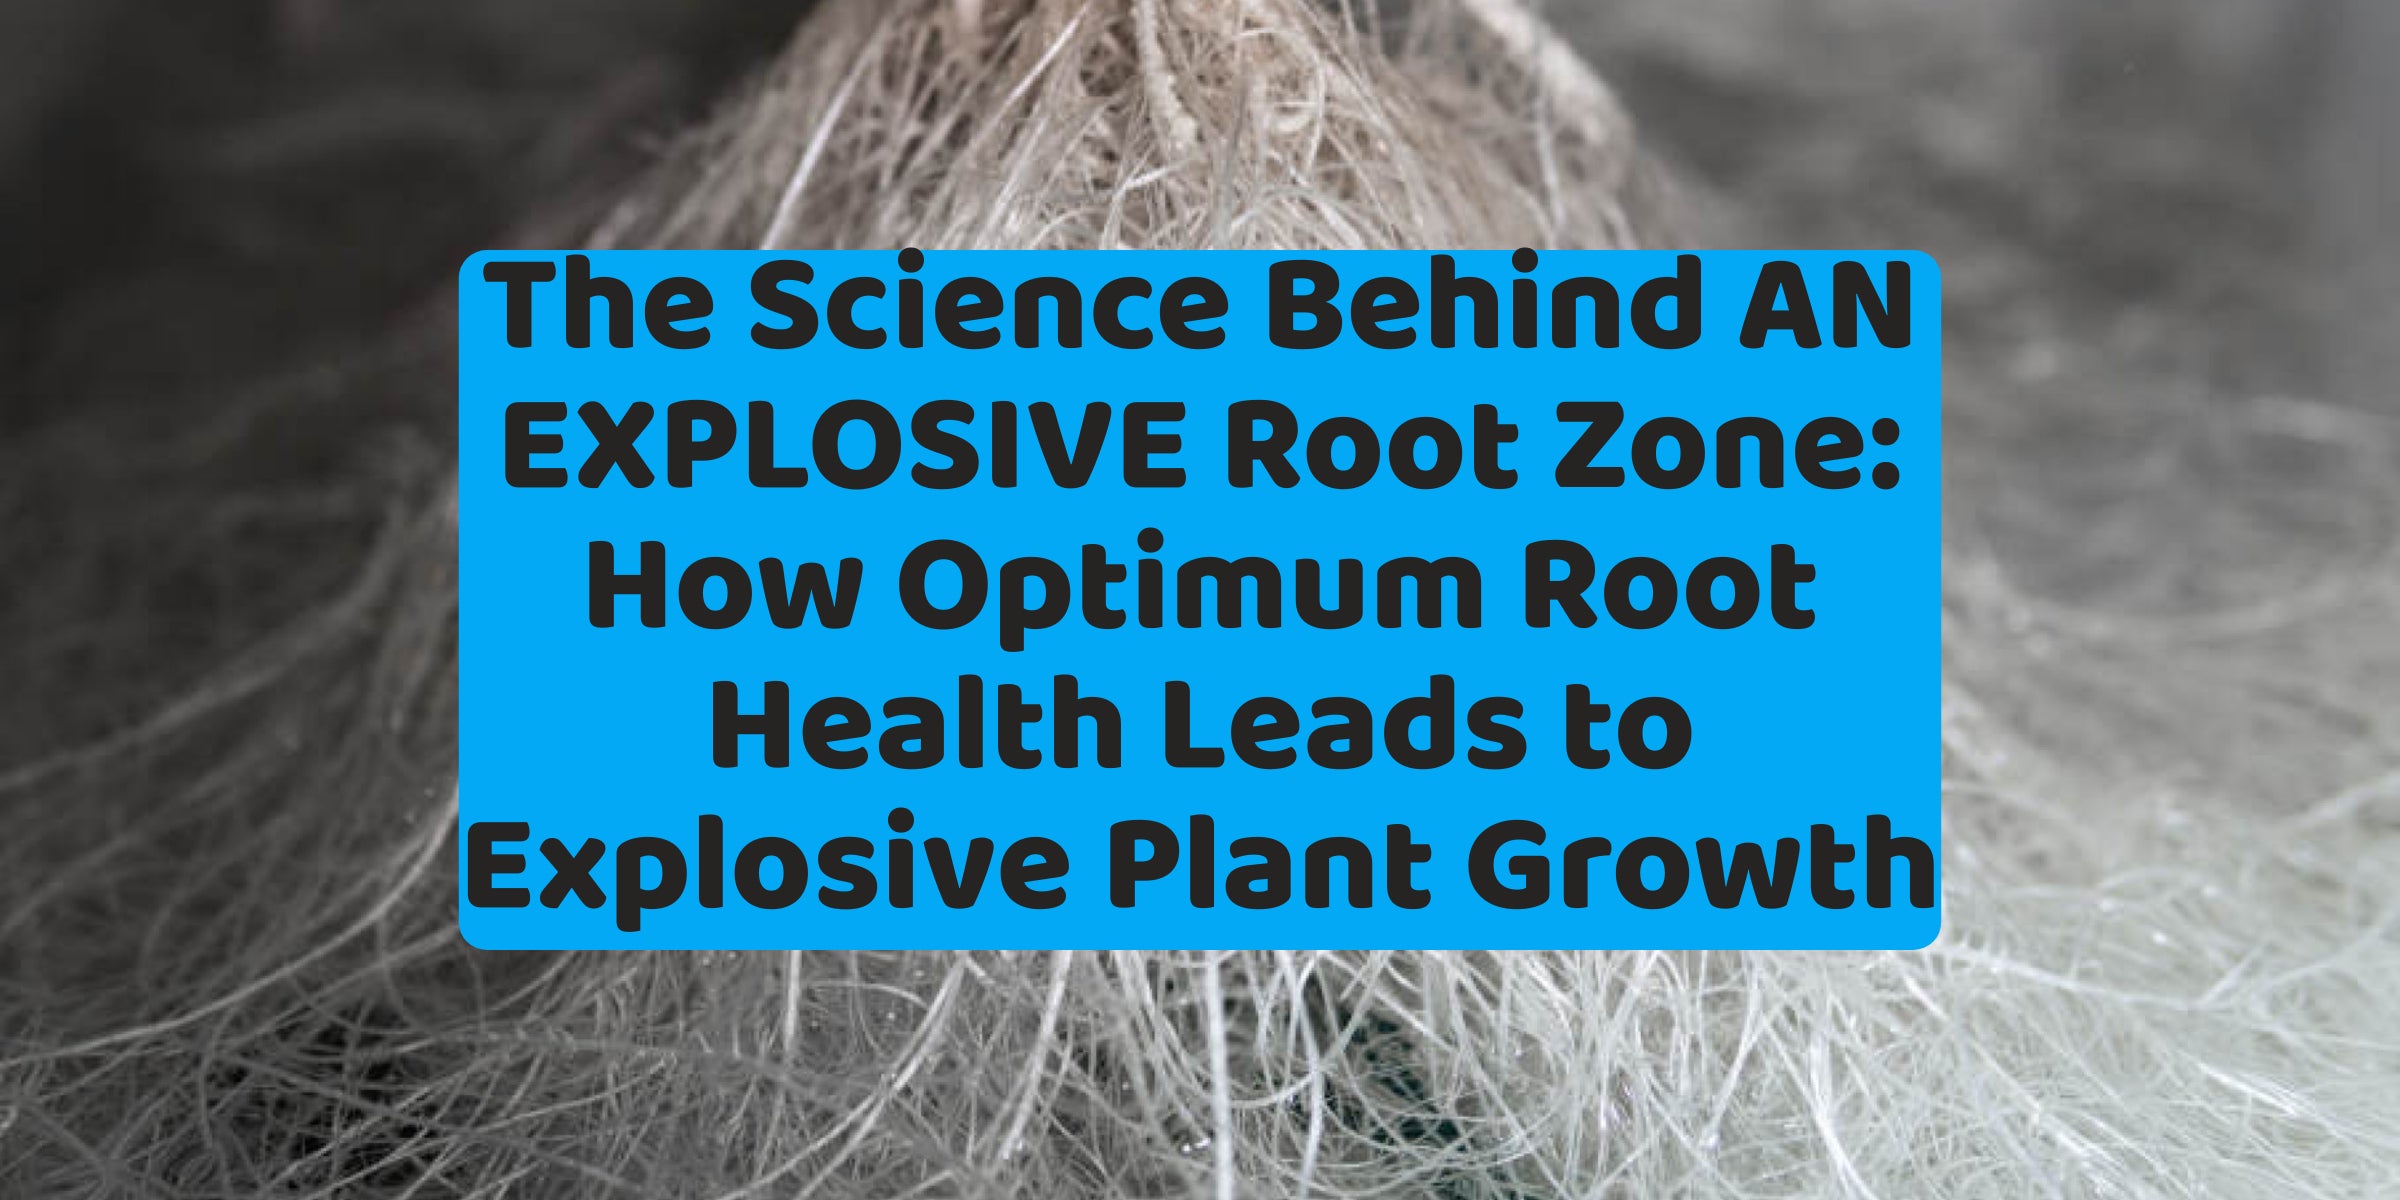 The Science Behind An EXPLOSIVE Root Zone: How Optimum Root Health Leads to Explosive Plant Growth